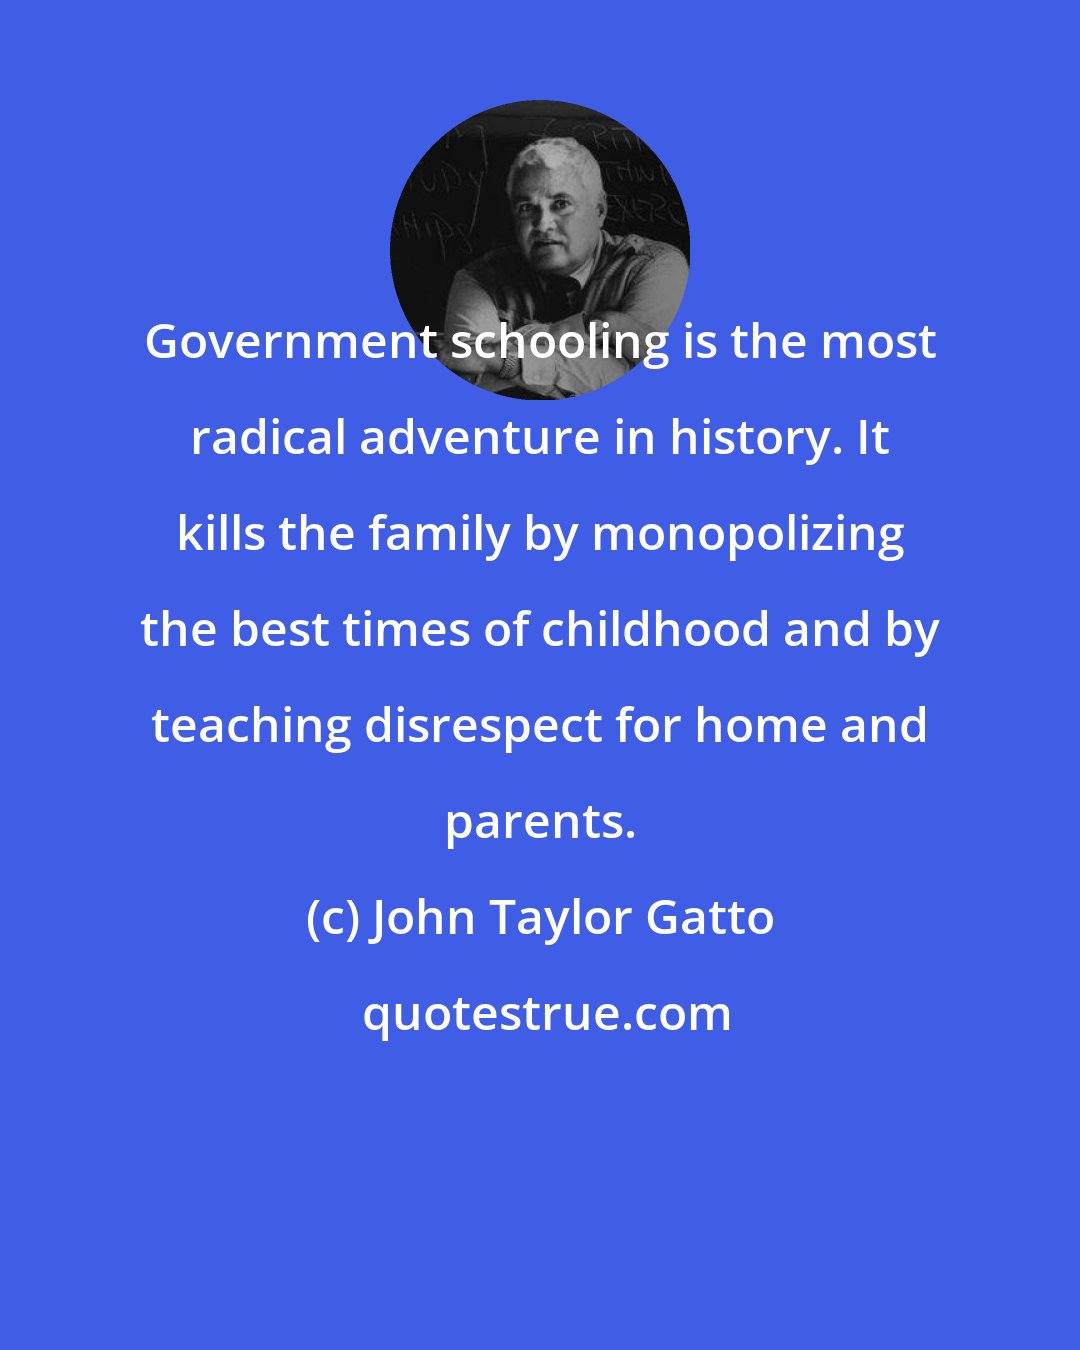 John Taylor Gatto: Government schooling is the most radical adventure in history. It kills the family by monopolizing the best times of childhood and by teaching disrespect for home and parents.